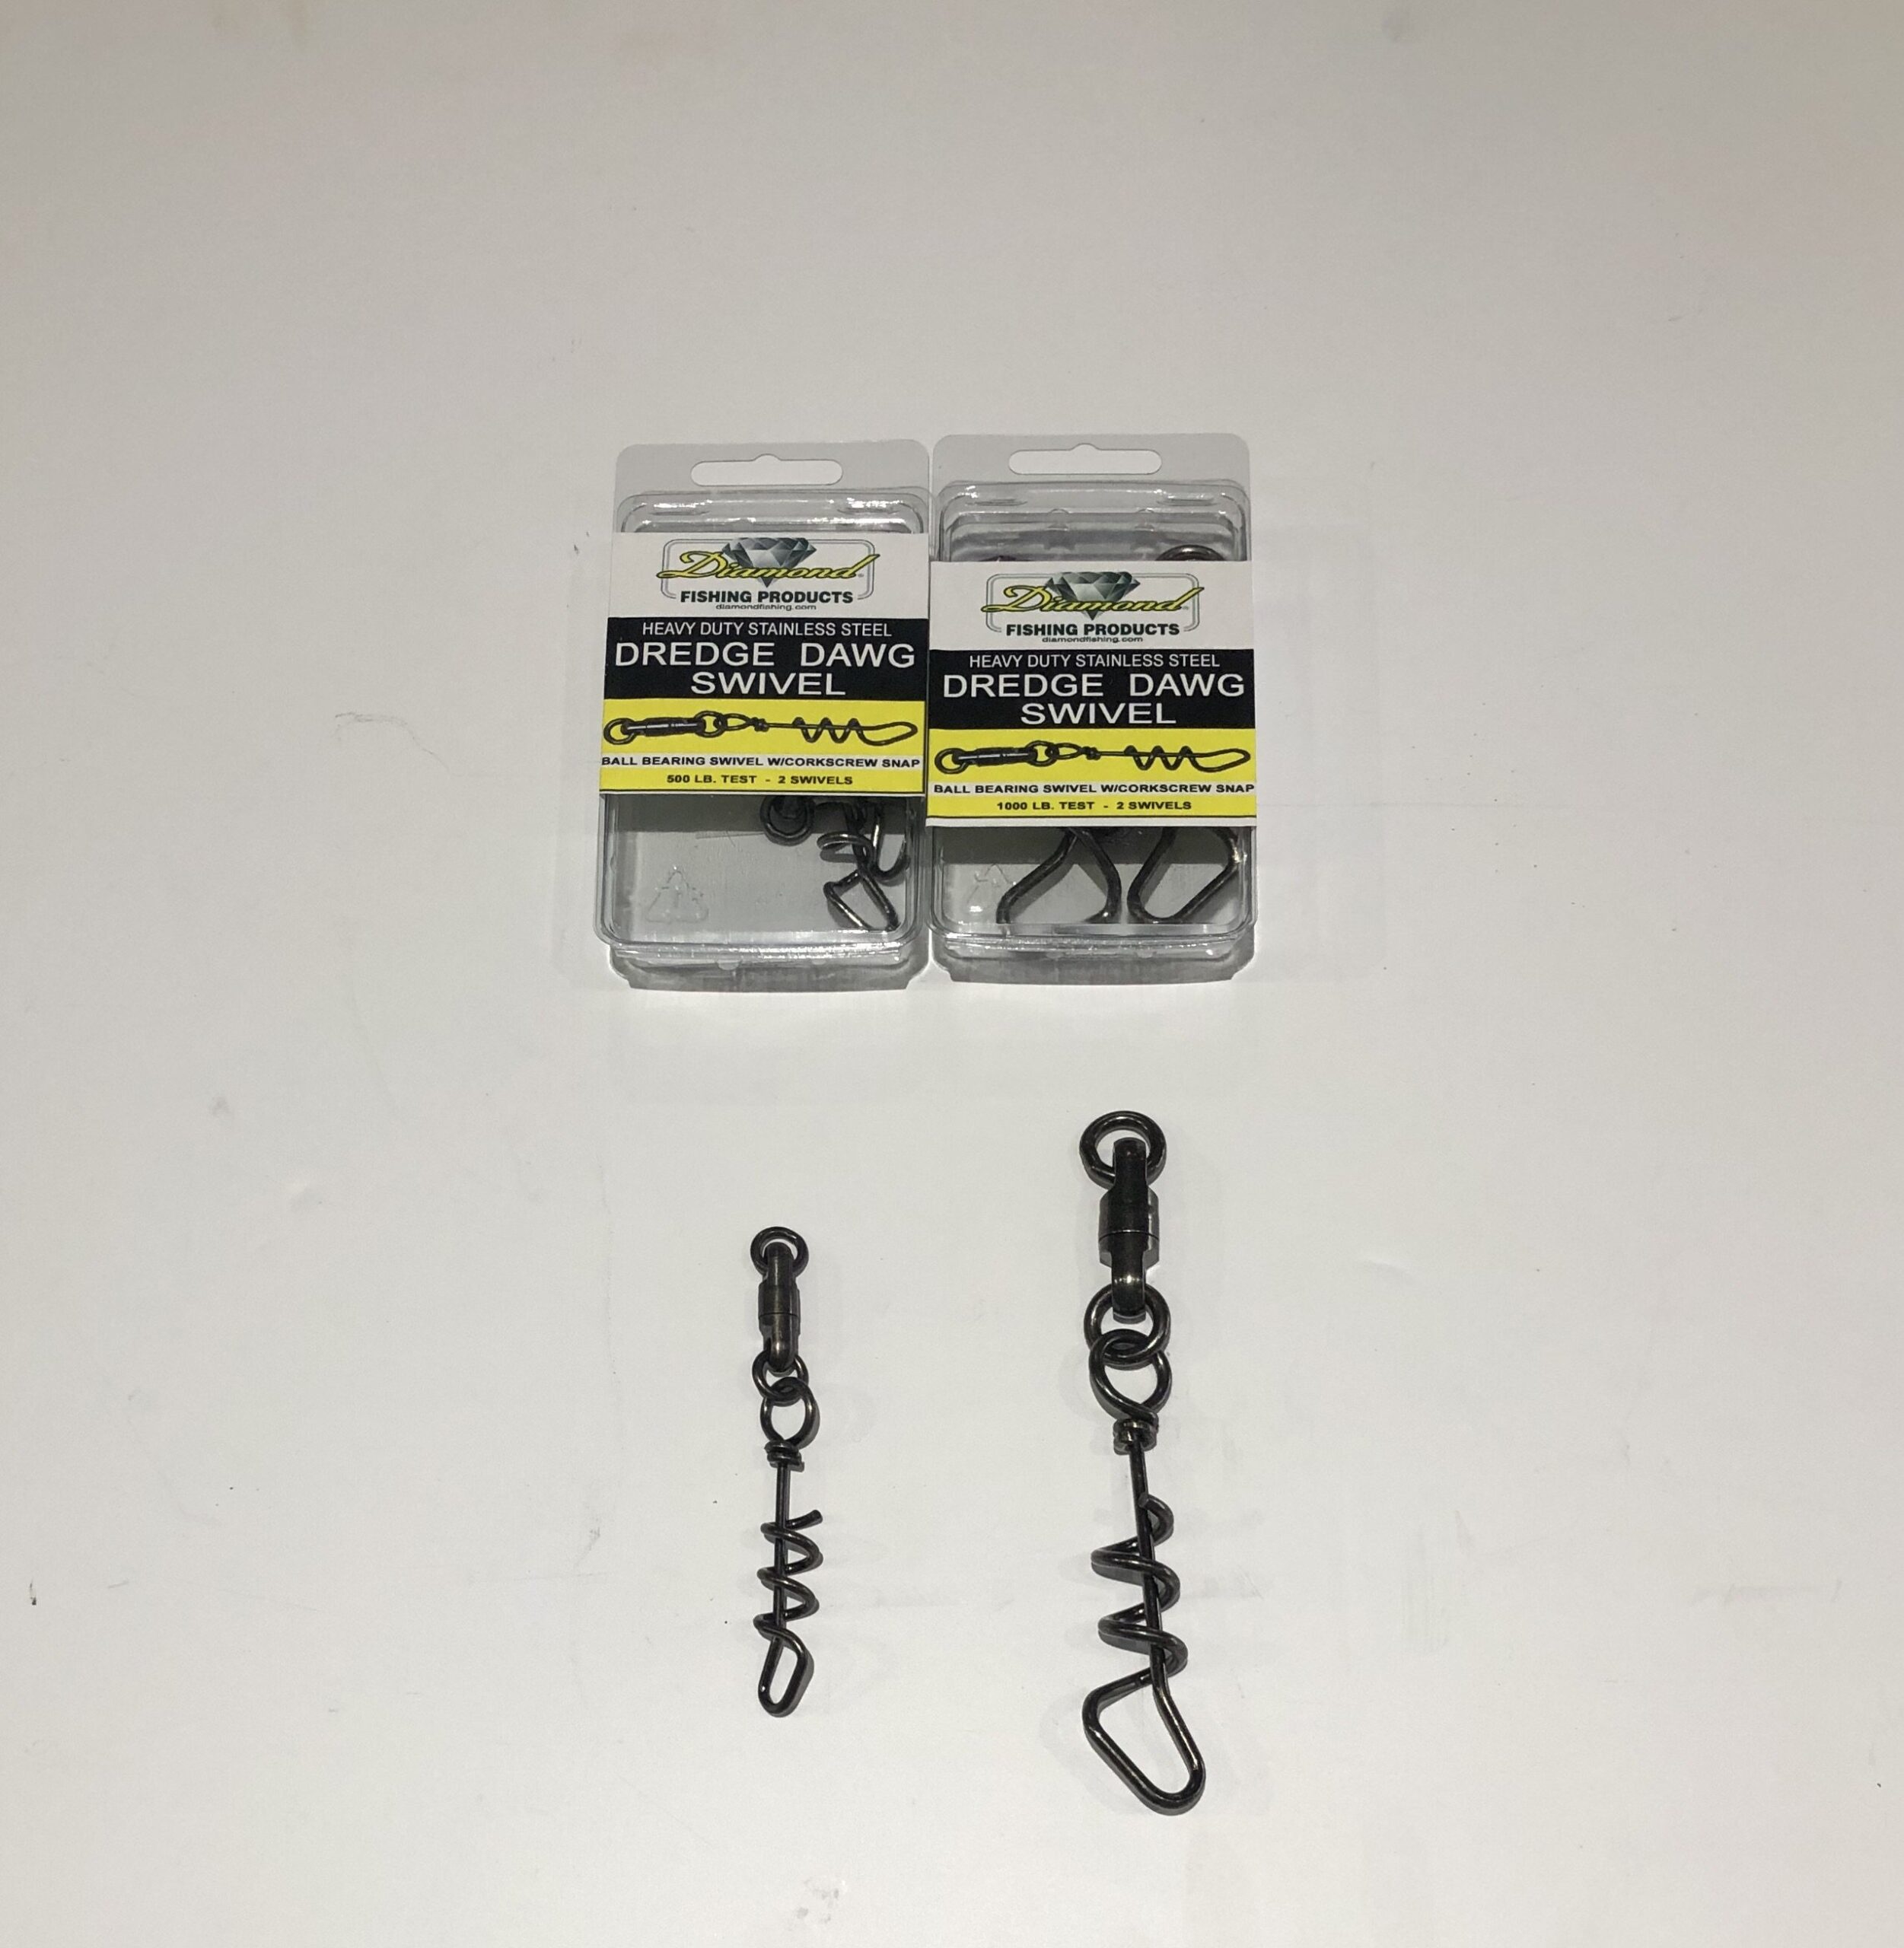 Dredge Dawg Swivel by Diamond Fishing Products